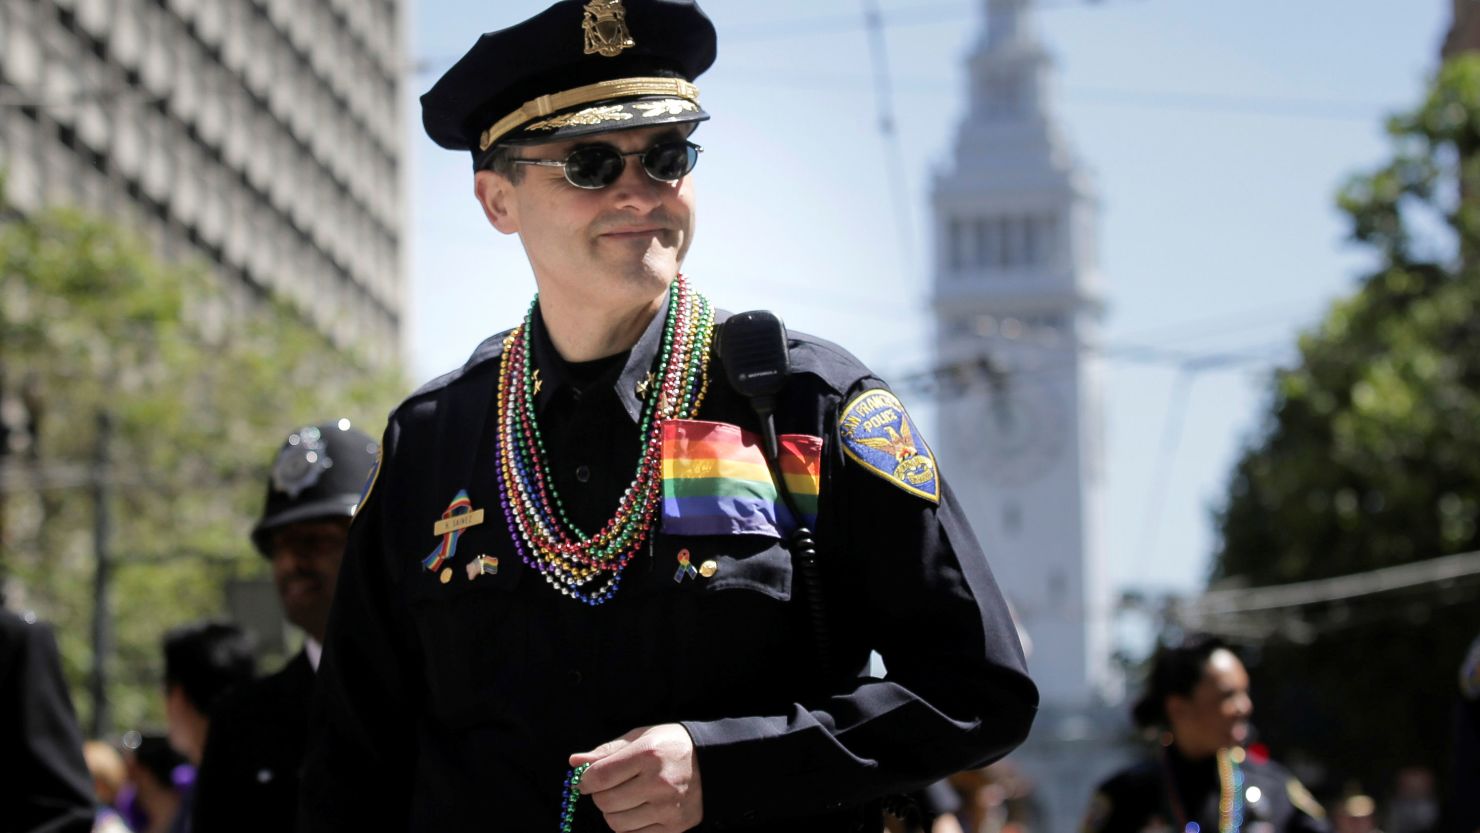 A San Francisco Police officer marches in the city's Pride parade in 2016.